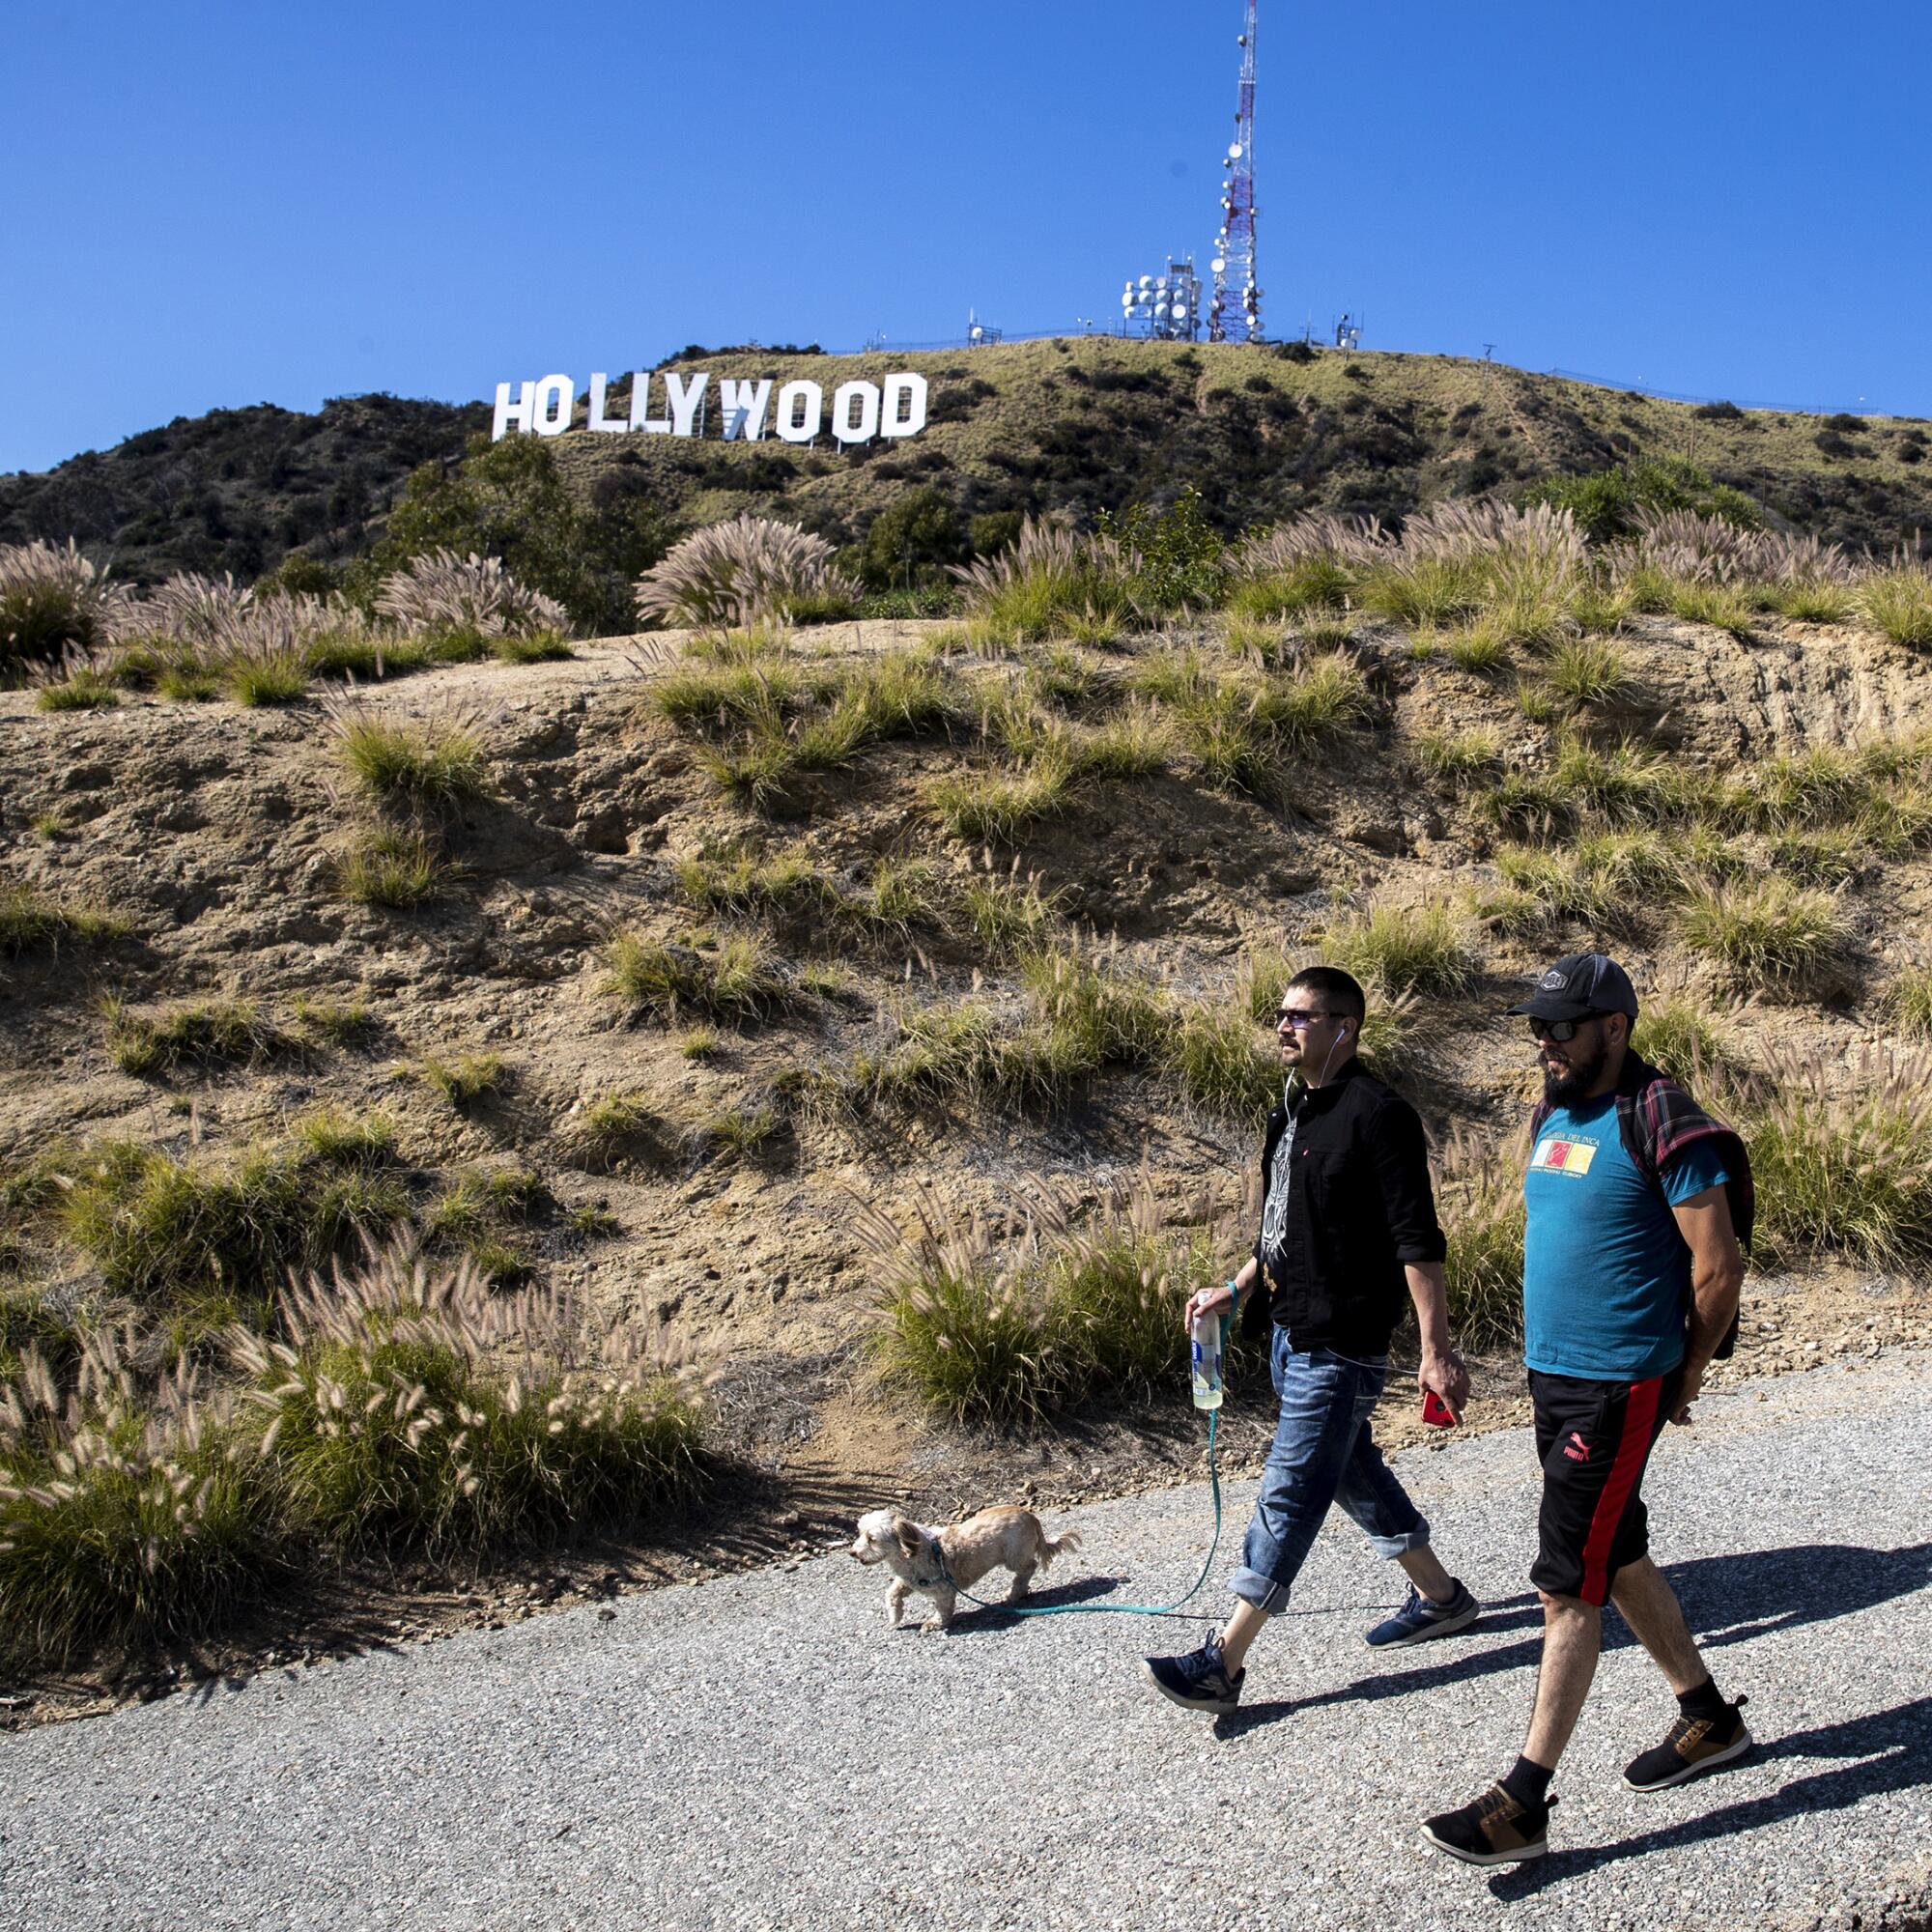 Hikers walk on a paved road in Griffith Park near the Hollywood sign.